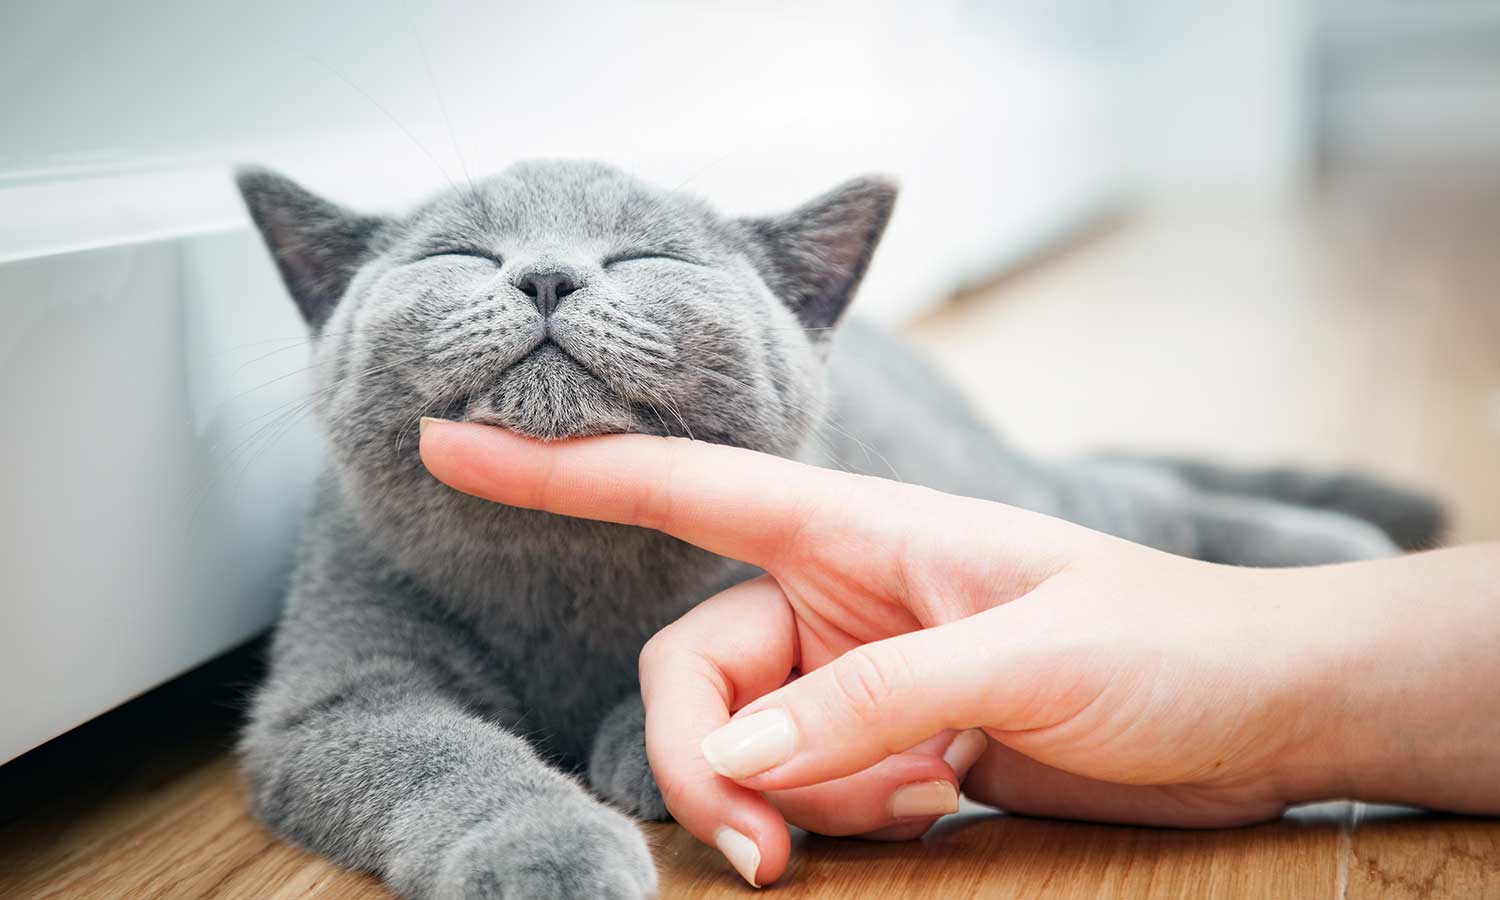 A grey cat being stroked on the chin